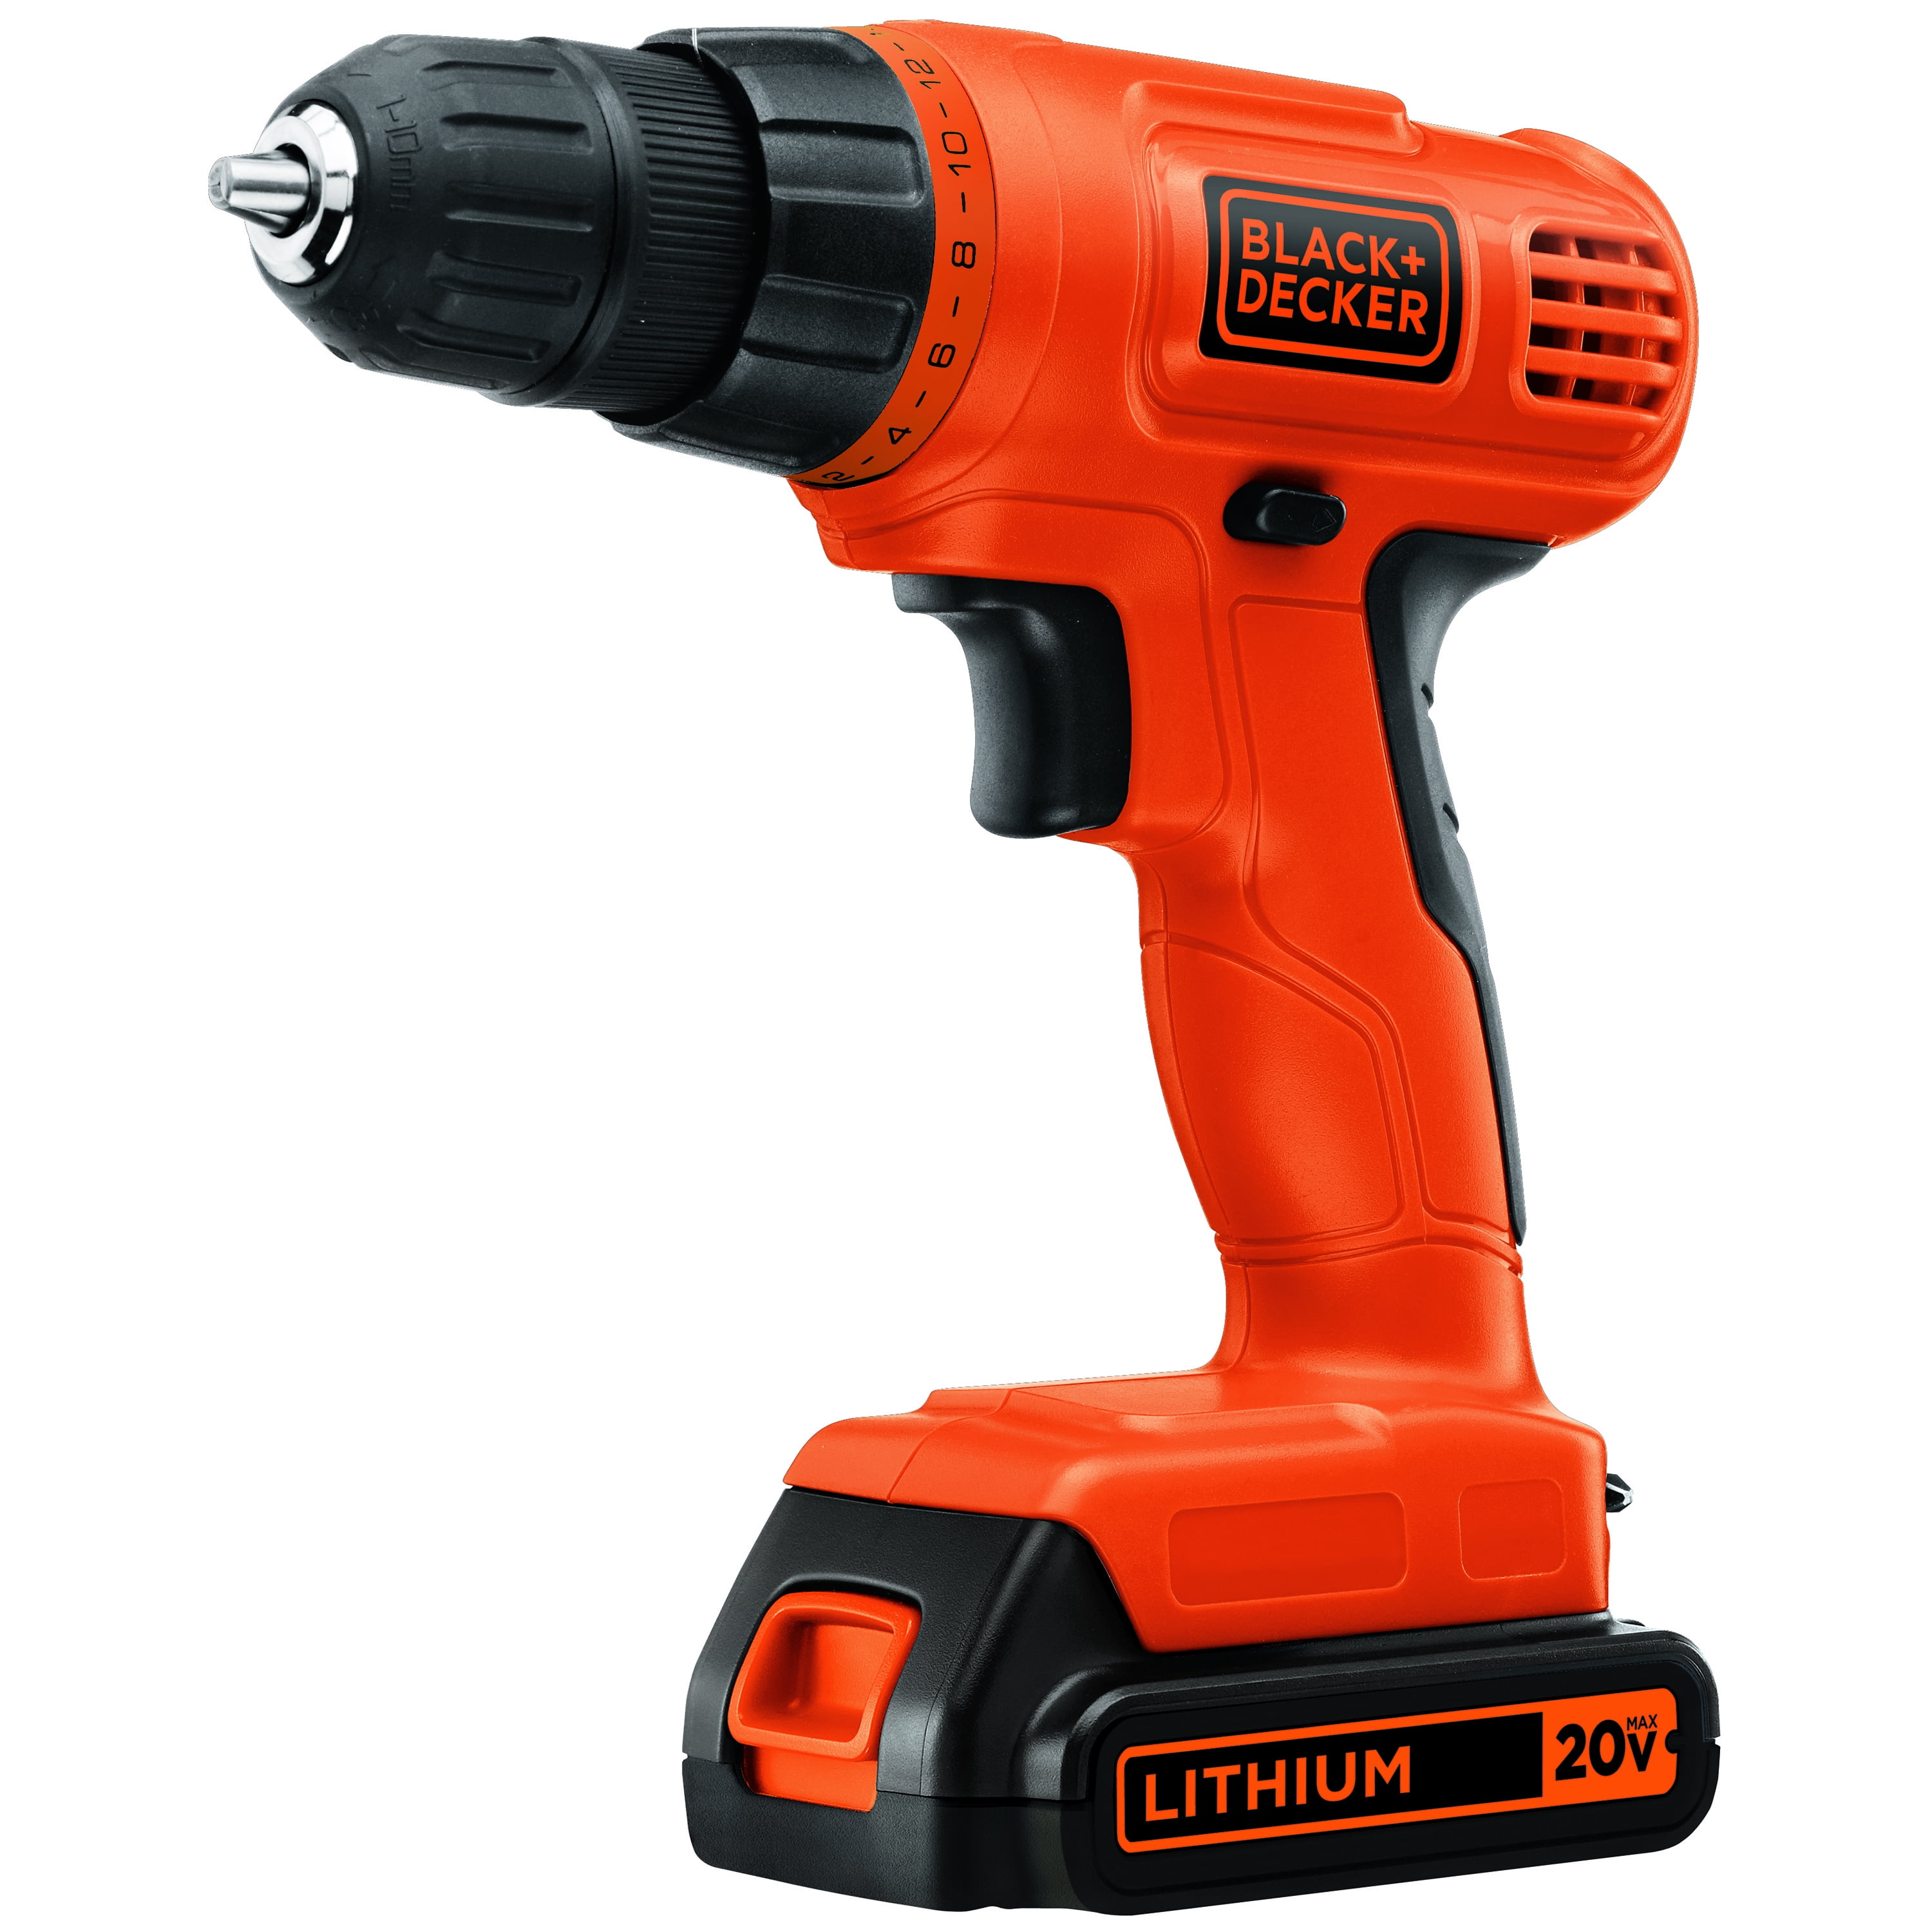 BLACK+DECKER GC1800 Cordless Drill and Battery - No Charger.